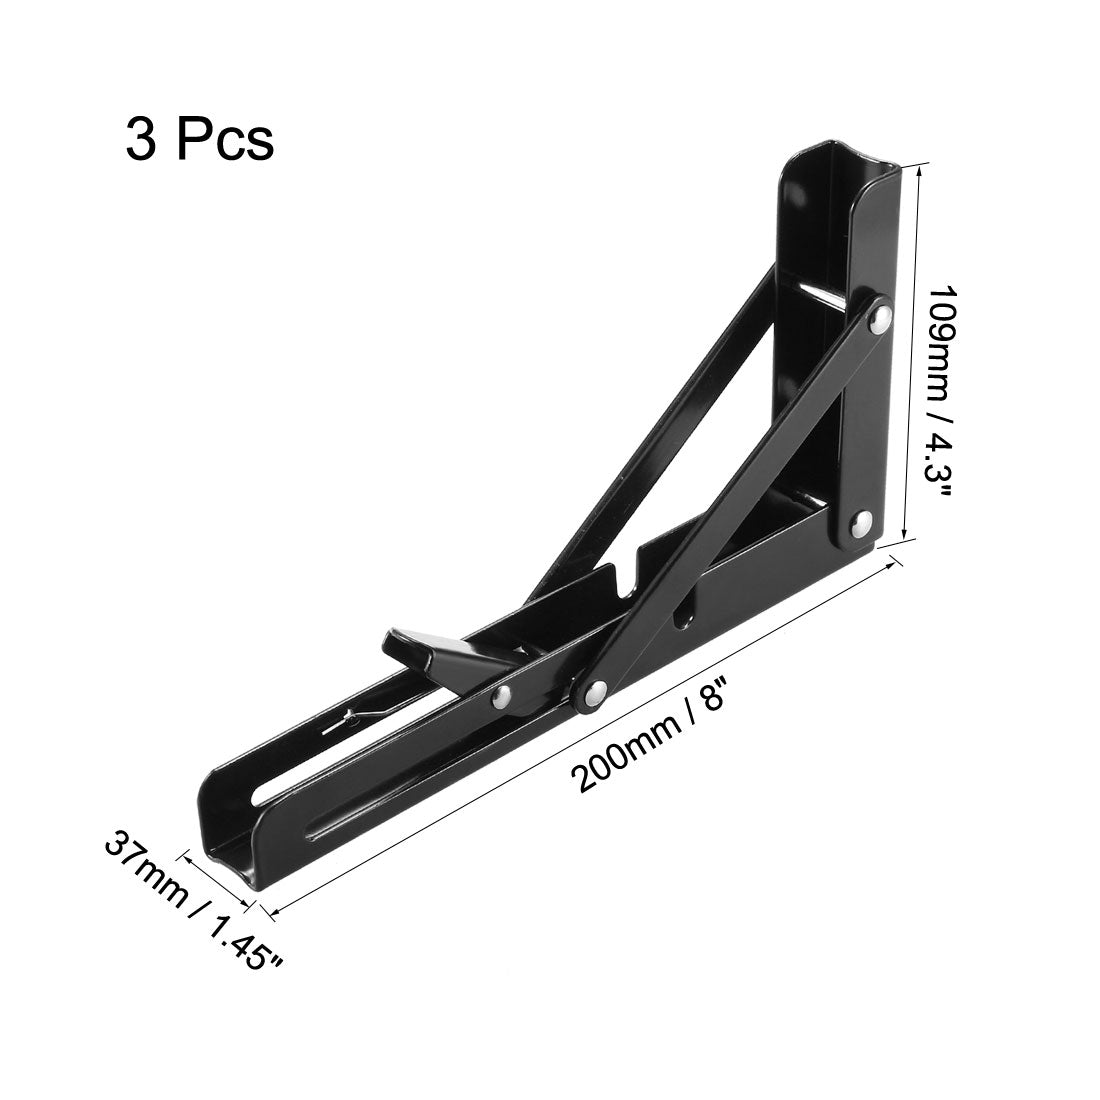 uxcell Uxcell Folding Bracket 8 inch 200mm for Shelves Table Desk Wall Mounted Support Collapsible Long Release Arm Space Saving Carbon Steel 3pcs